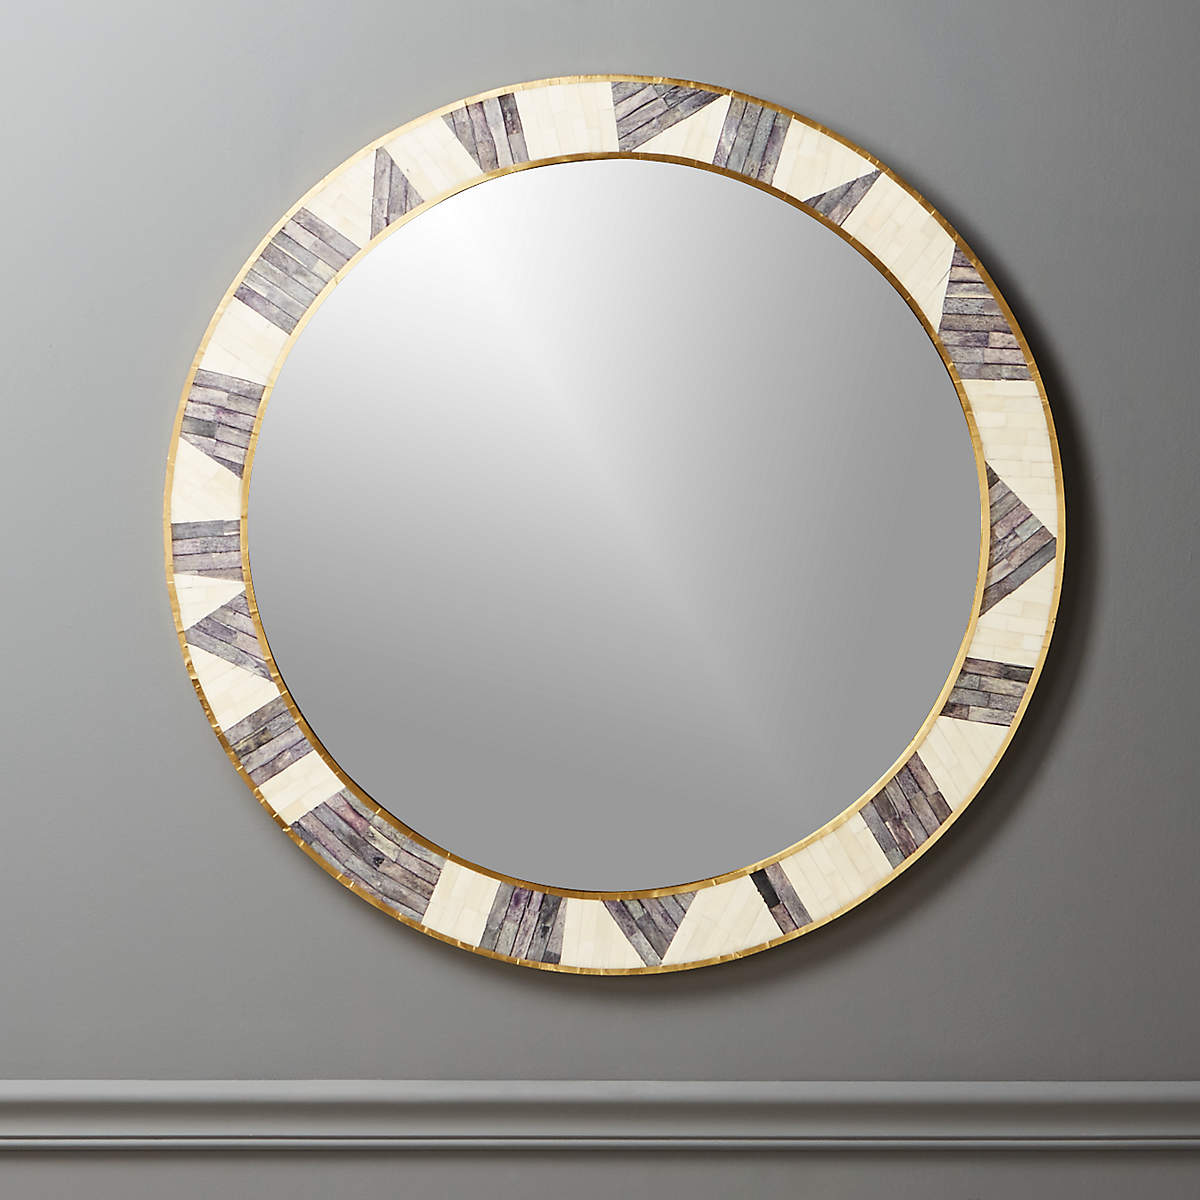 Rely on an Eclectic Mirror to Make it Bright